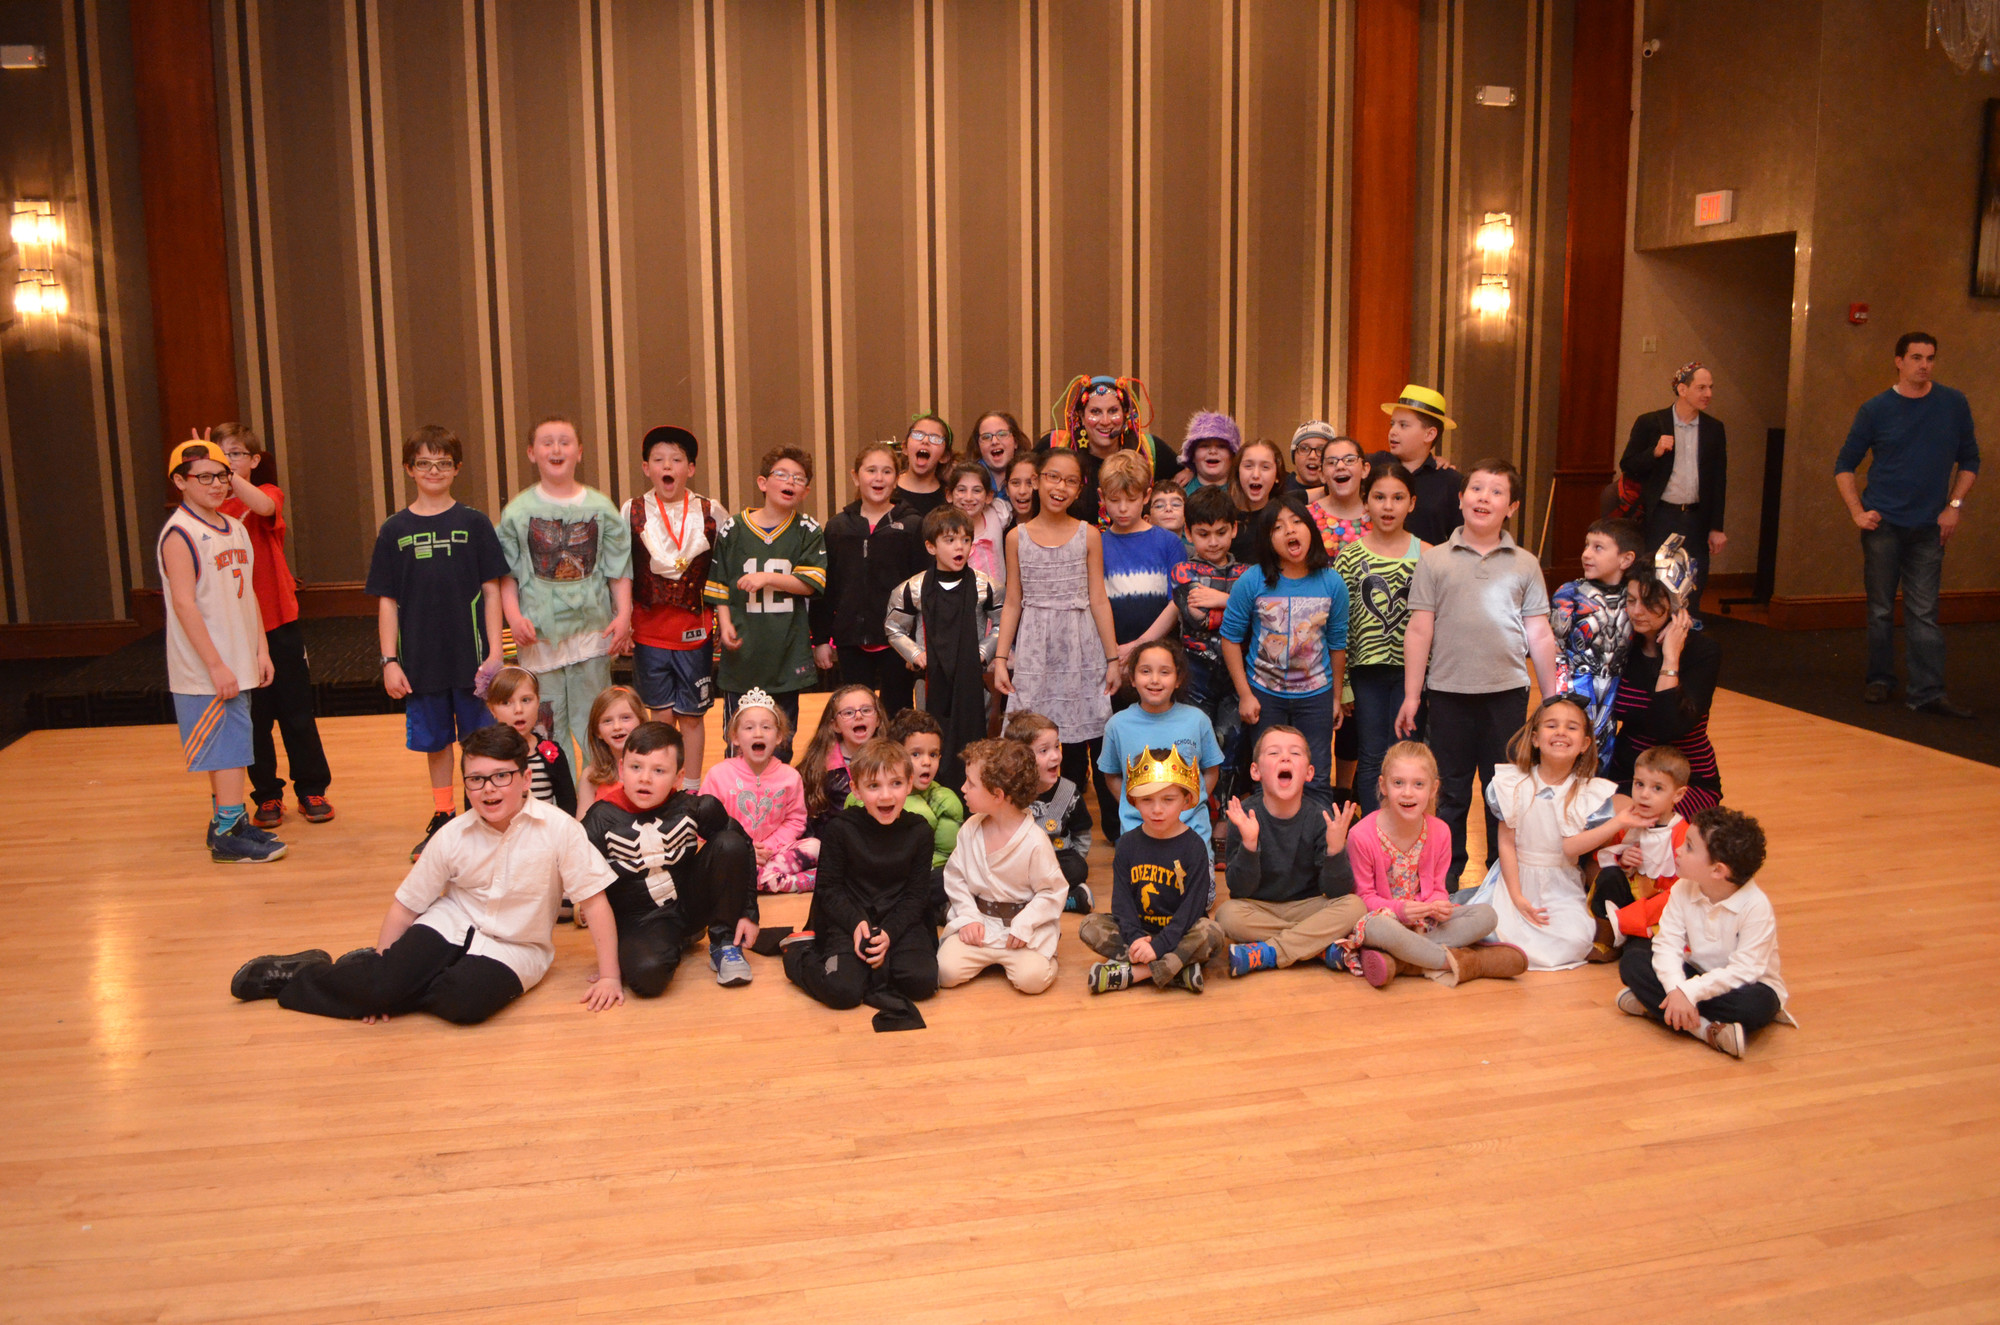 All of the children posed for a photo in the costumes that they wore for Purim.